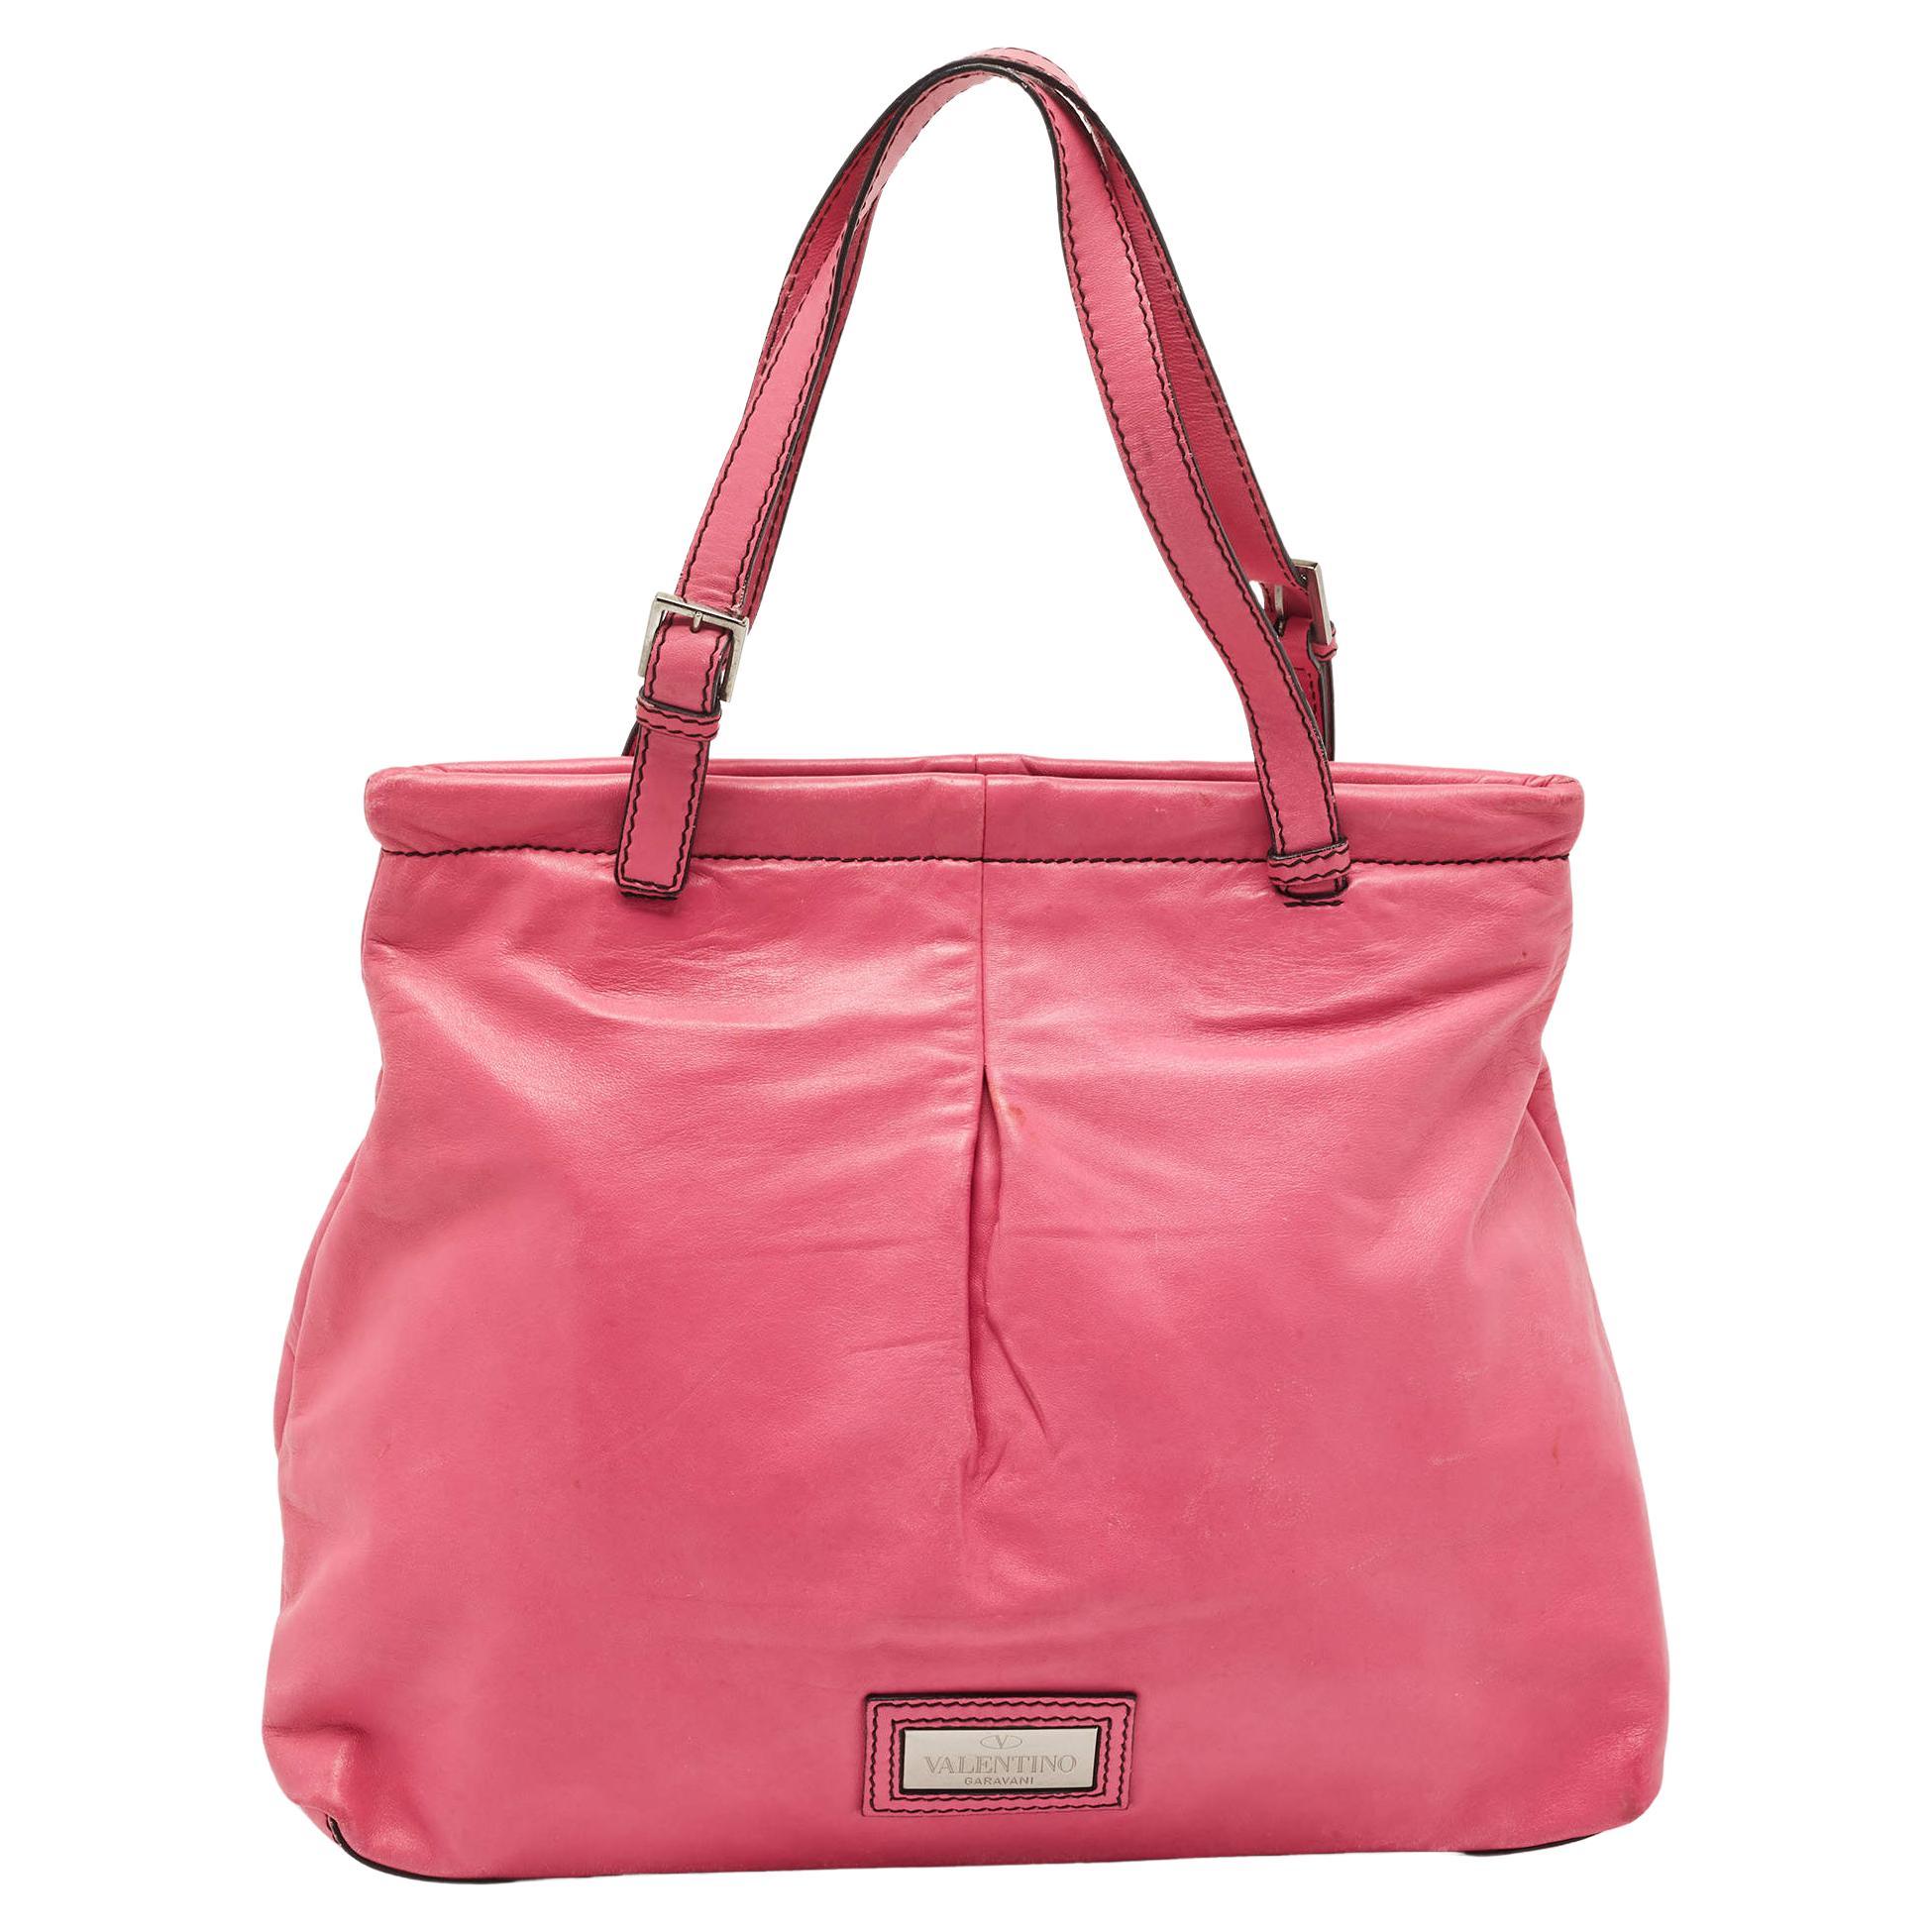 Valentino Pink Leather Tote